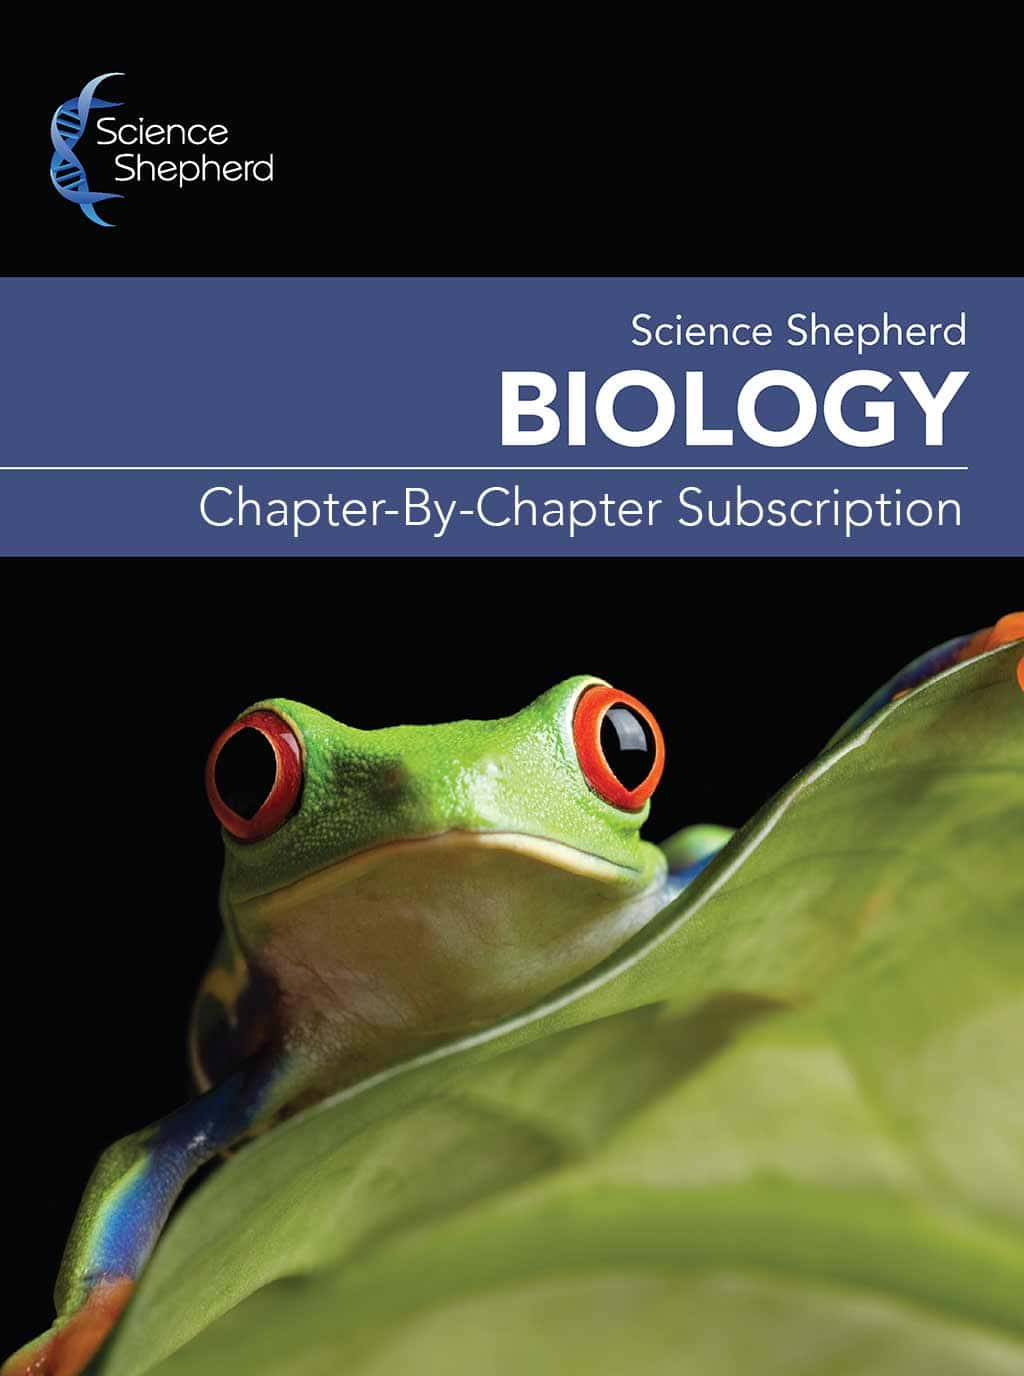 Science Shepherd Homeschool Biology Online Video Course for high school chapter-by-chapter cover